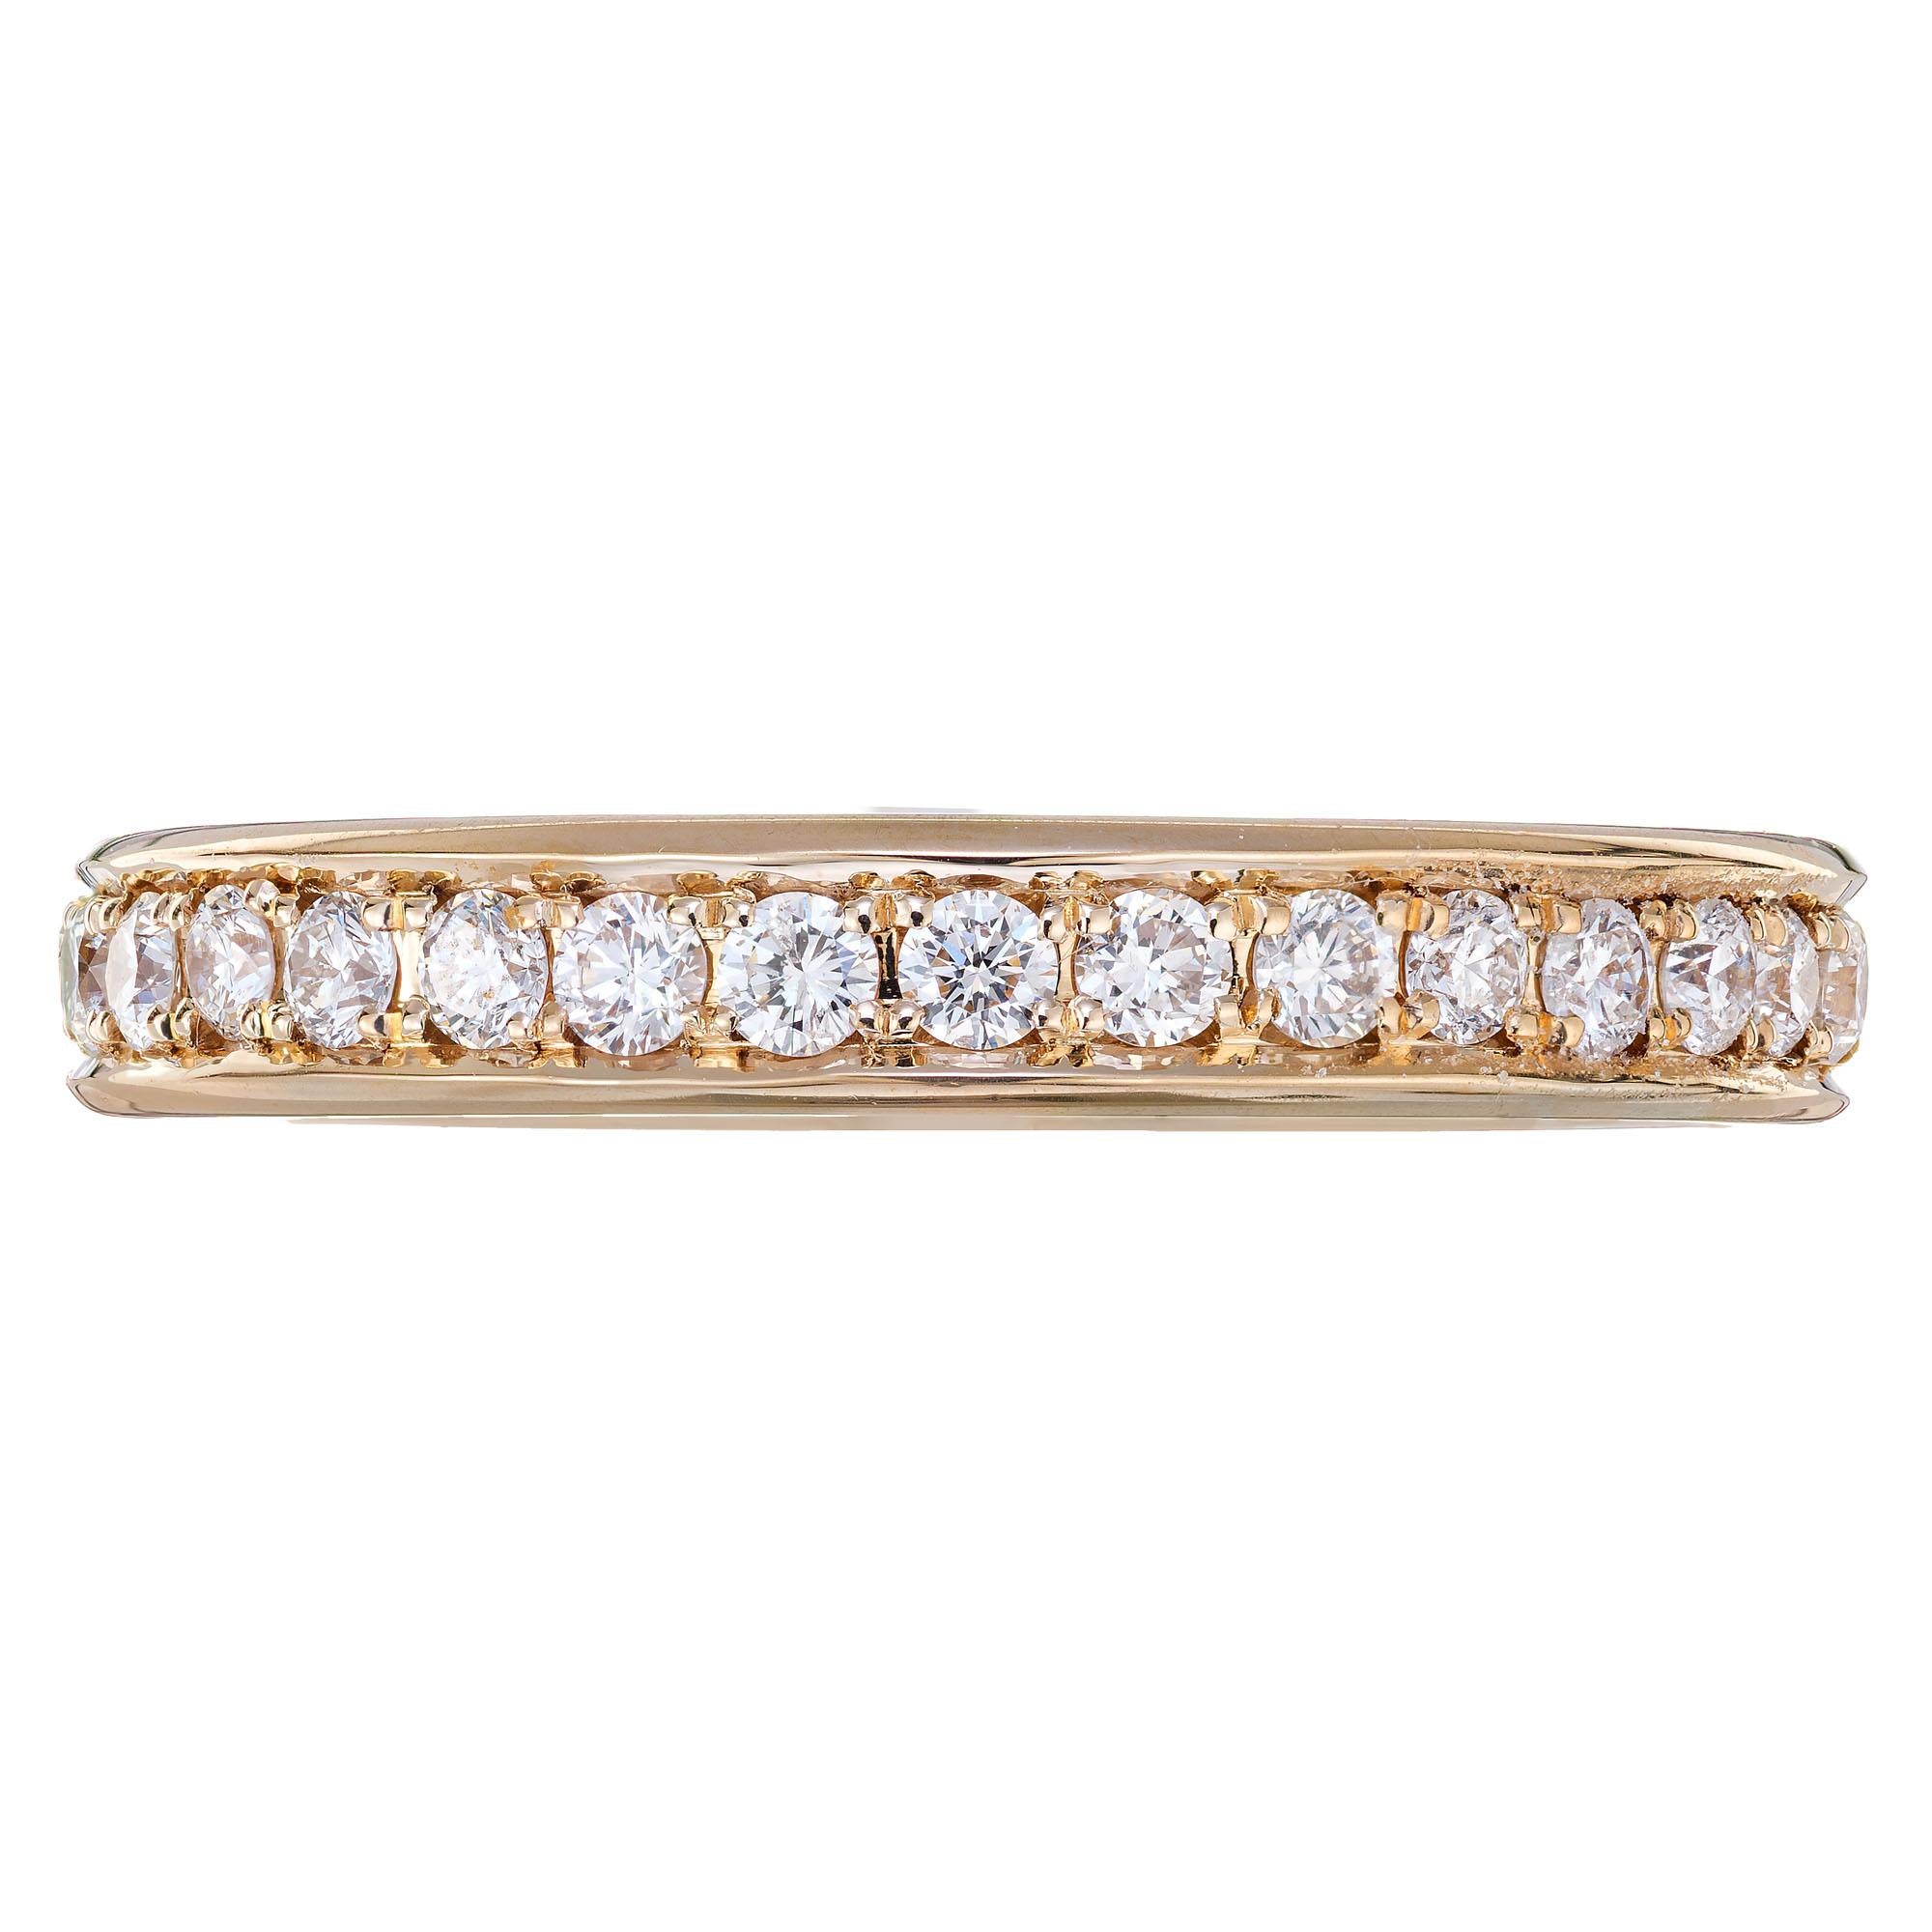 Diamond eternity wedding band ring. 31 round cut diamonds in a 14k yellow gold eternity band. Custom made in Victorian Revival style by the Peter Suchy Workshop. 

31 round diamonds, approx. total weight .75cts, F-G, VS
Size 6.25 (Order or